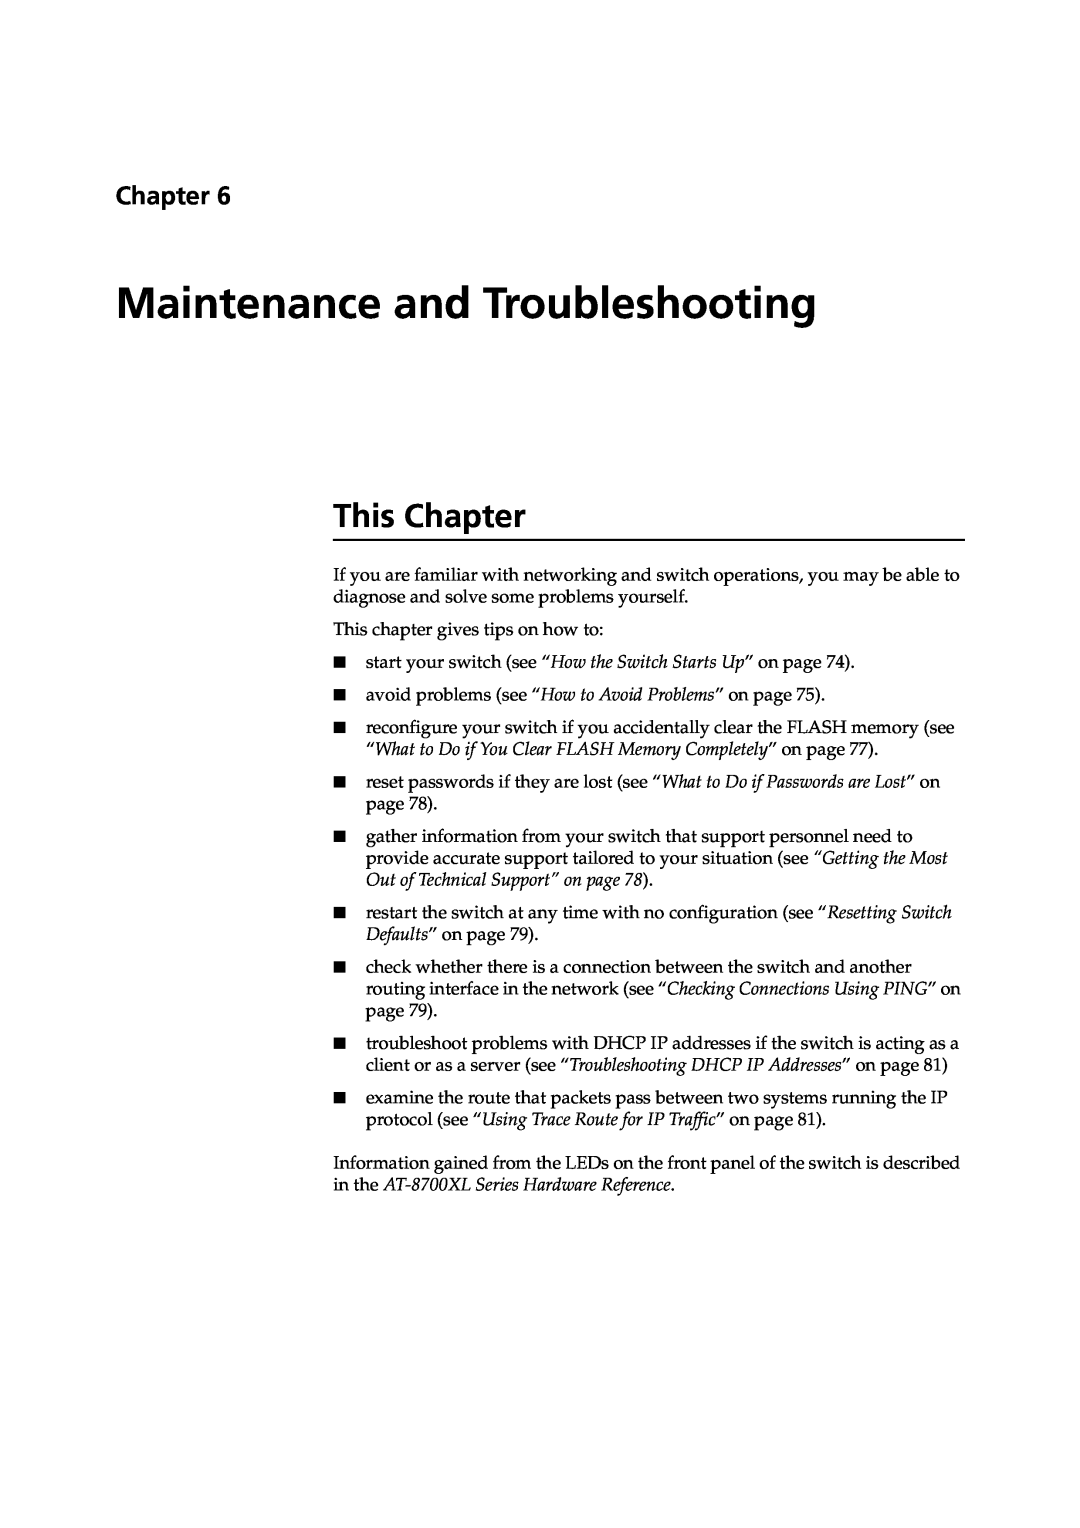 Allied Telesis at-8700xl series switch manual Maintenance and Troubleshooting, This Chapter 